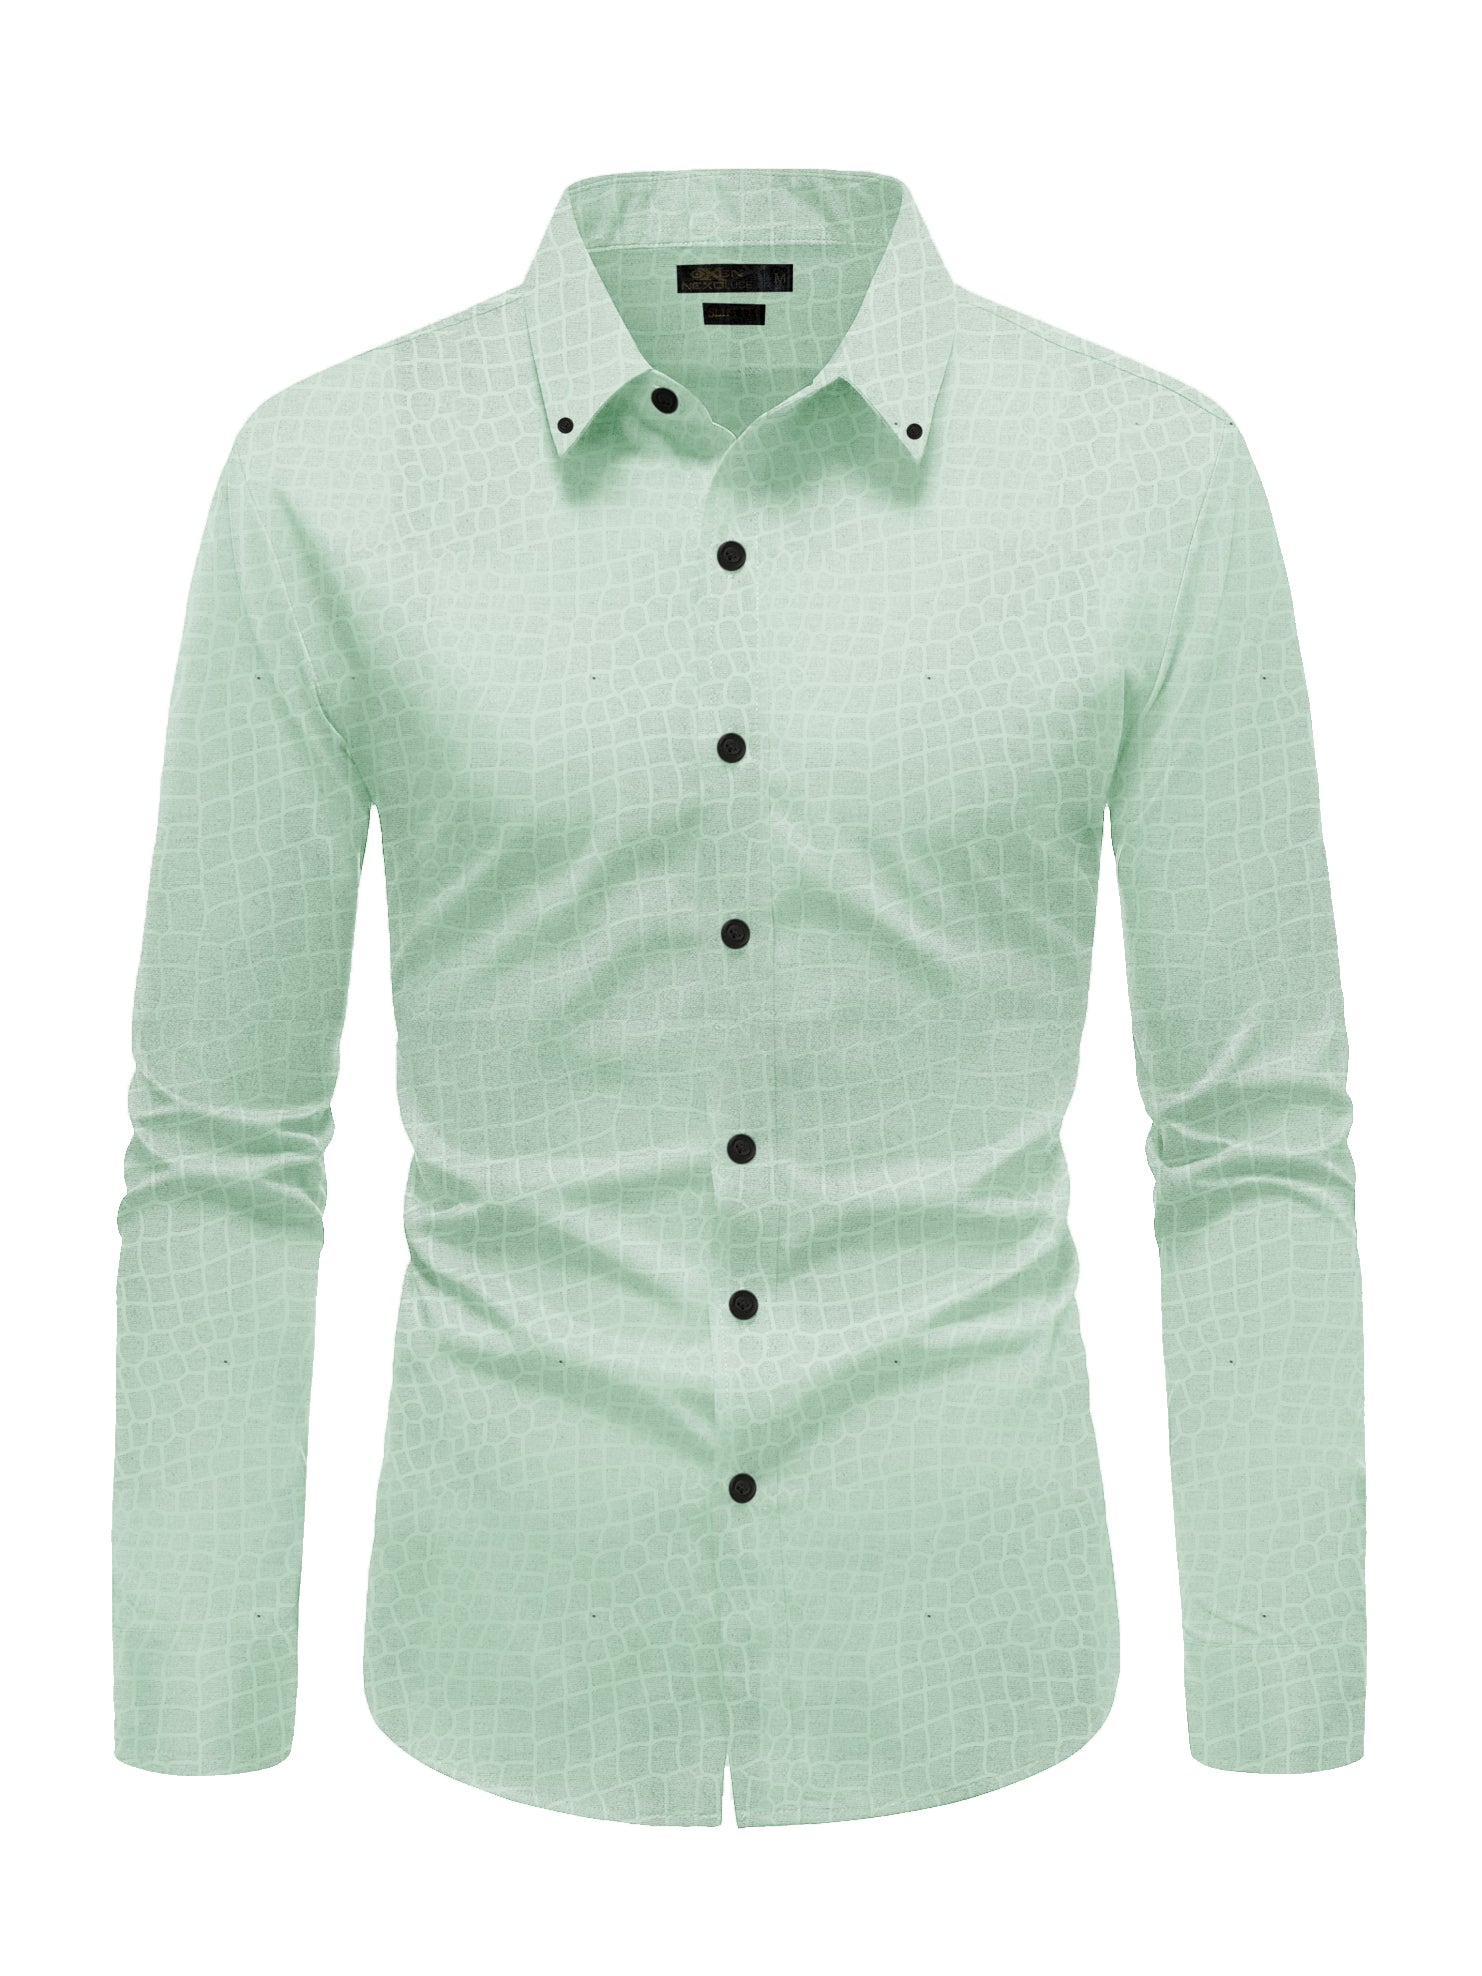 Oxen Nexoluce Premium Slim Fit Casual Shirt For Men-Cyan Green with Allover Texture-SP2163